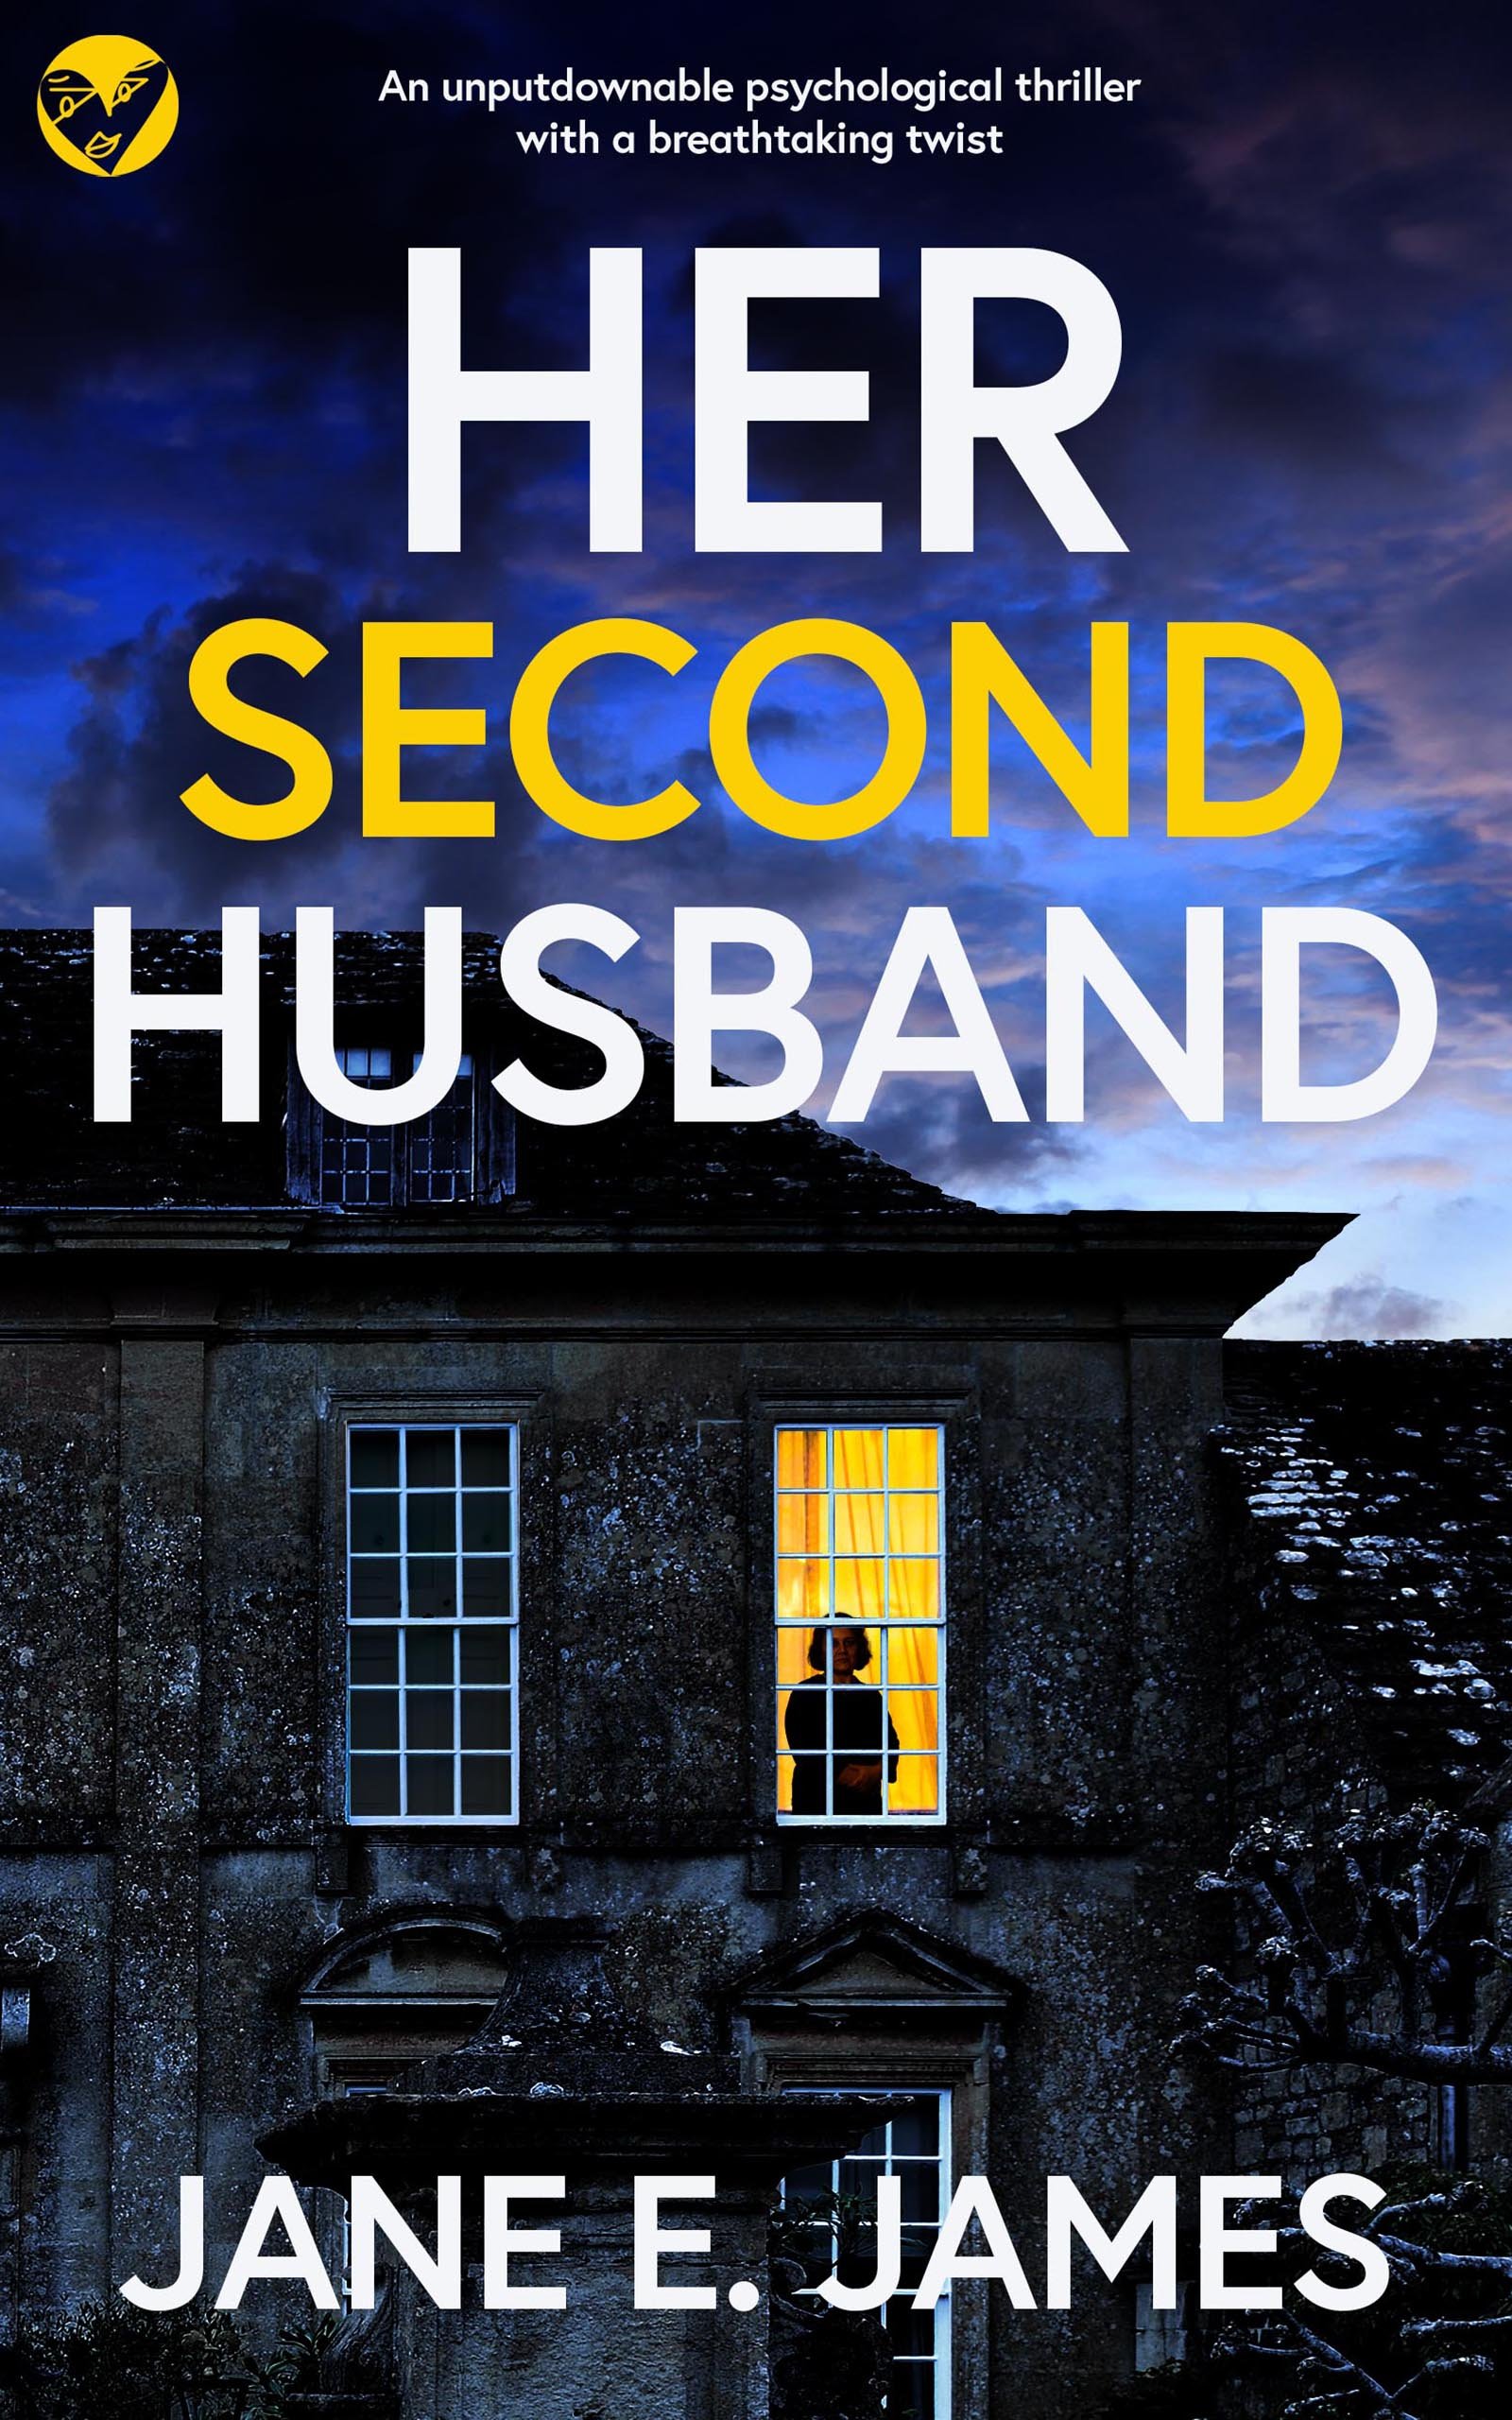 HER SECOND HUSBAND cover publish.jpg